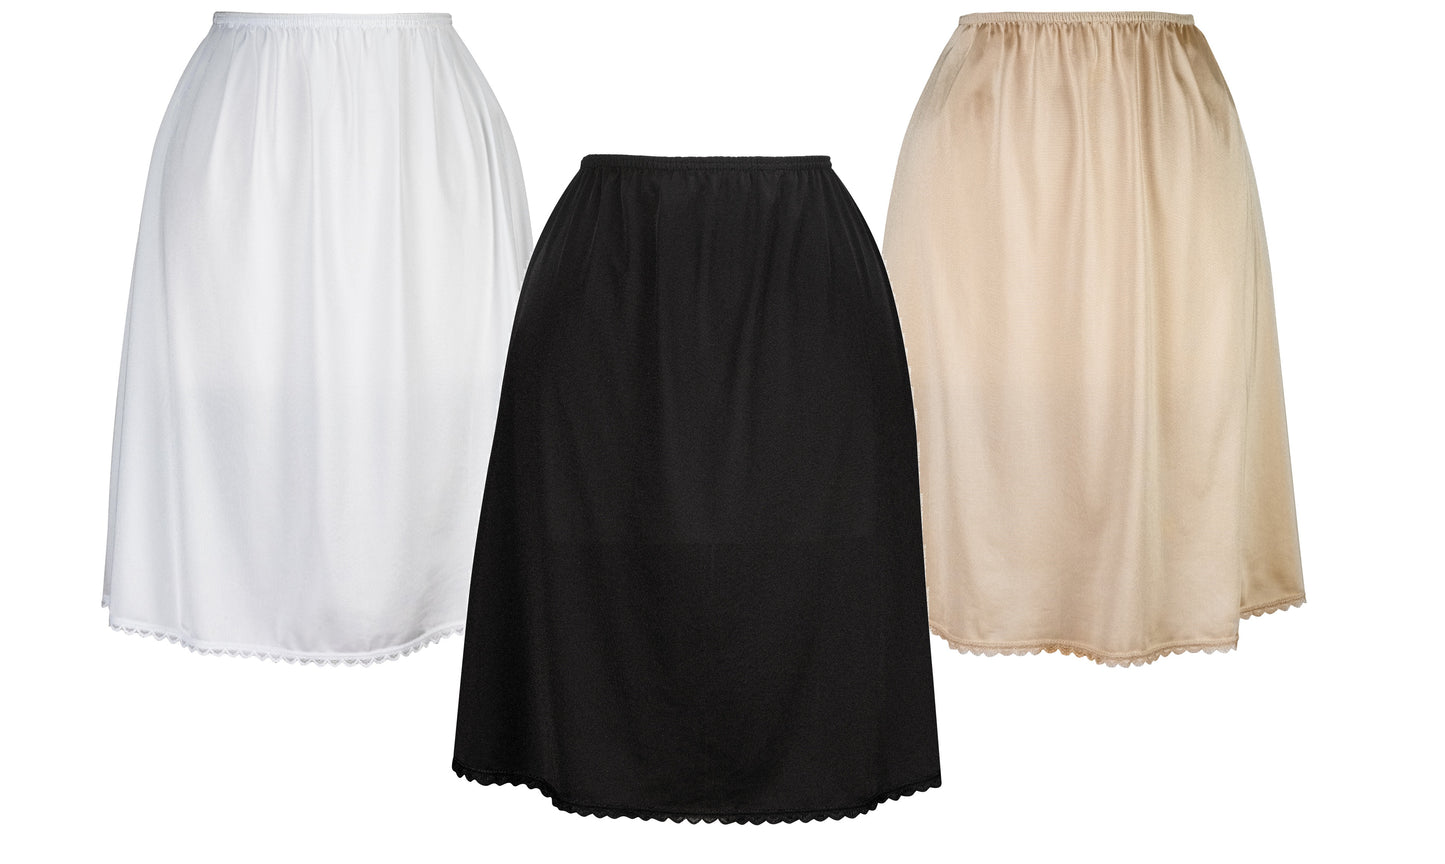 Classic Half Slip - short and long - ranges from 14" till 34" (Nude)